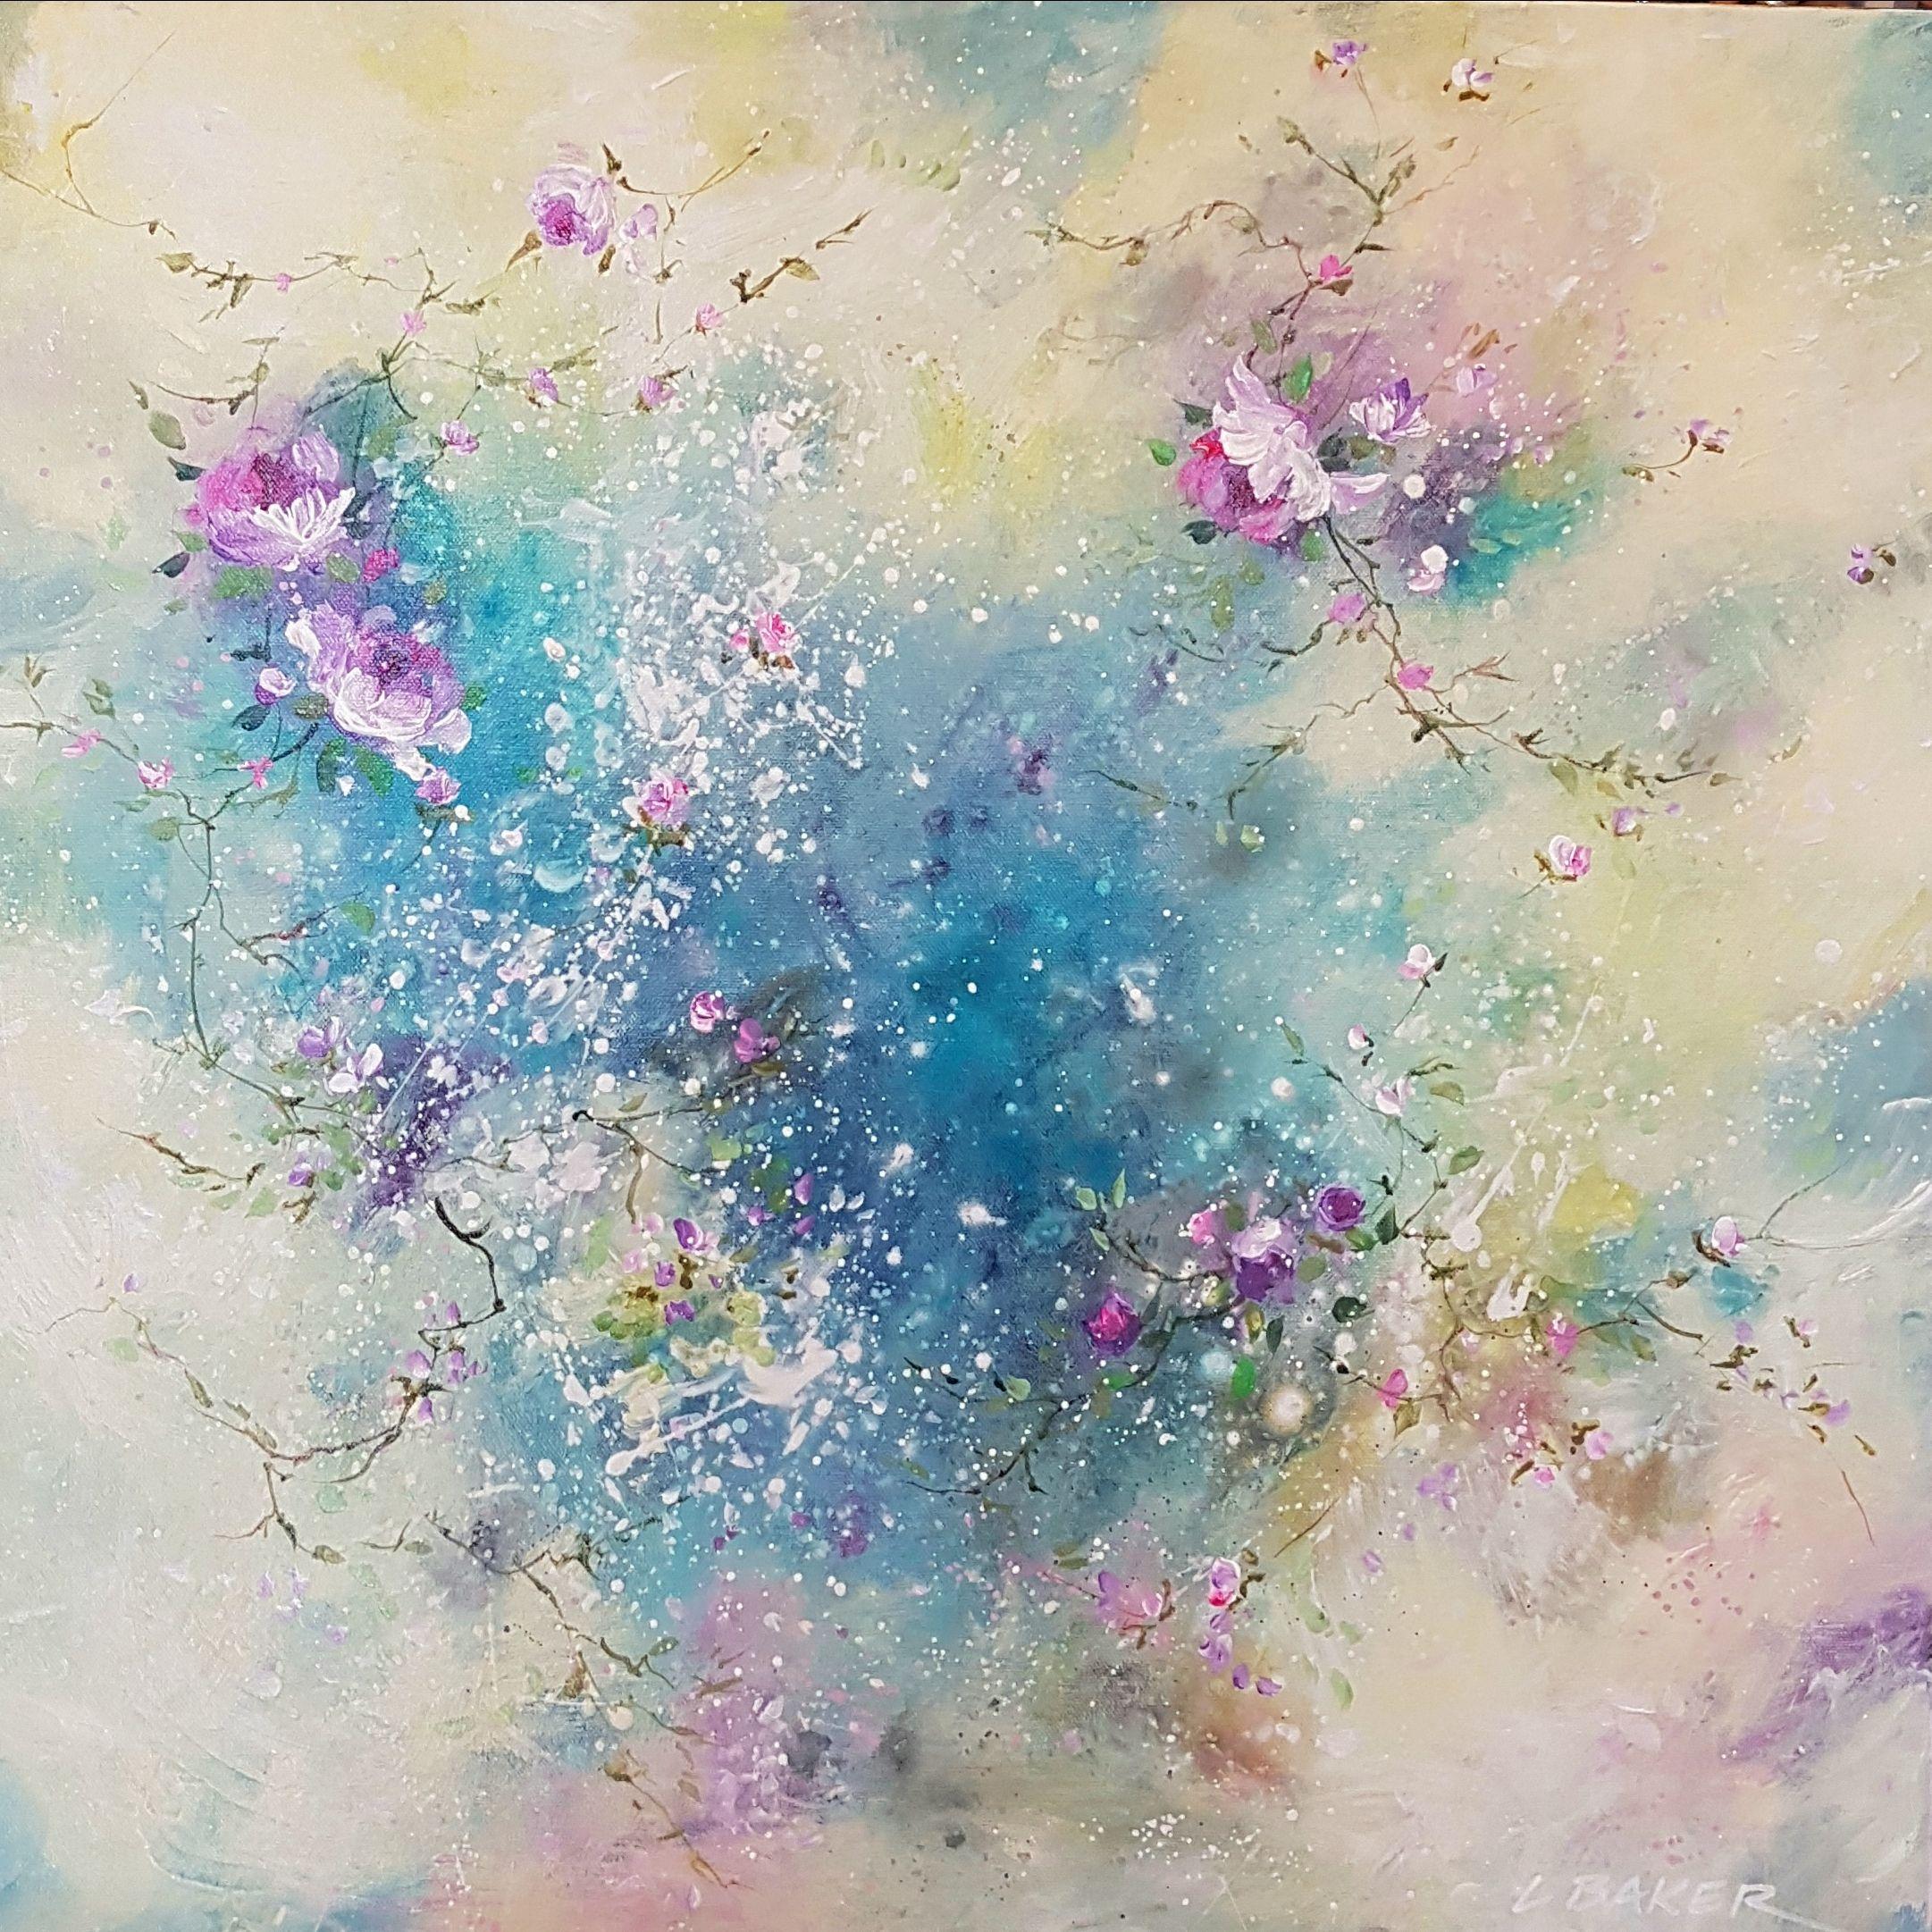 Gentle ephemeral artwork depicting roses. This piece is created with many layers of paint to create the soft dissolving effect. The background is soft butter yellow with accents in vivid blue and the tumbling roses are purple and magenta. Very